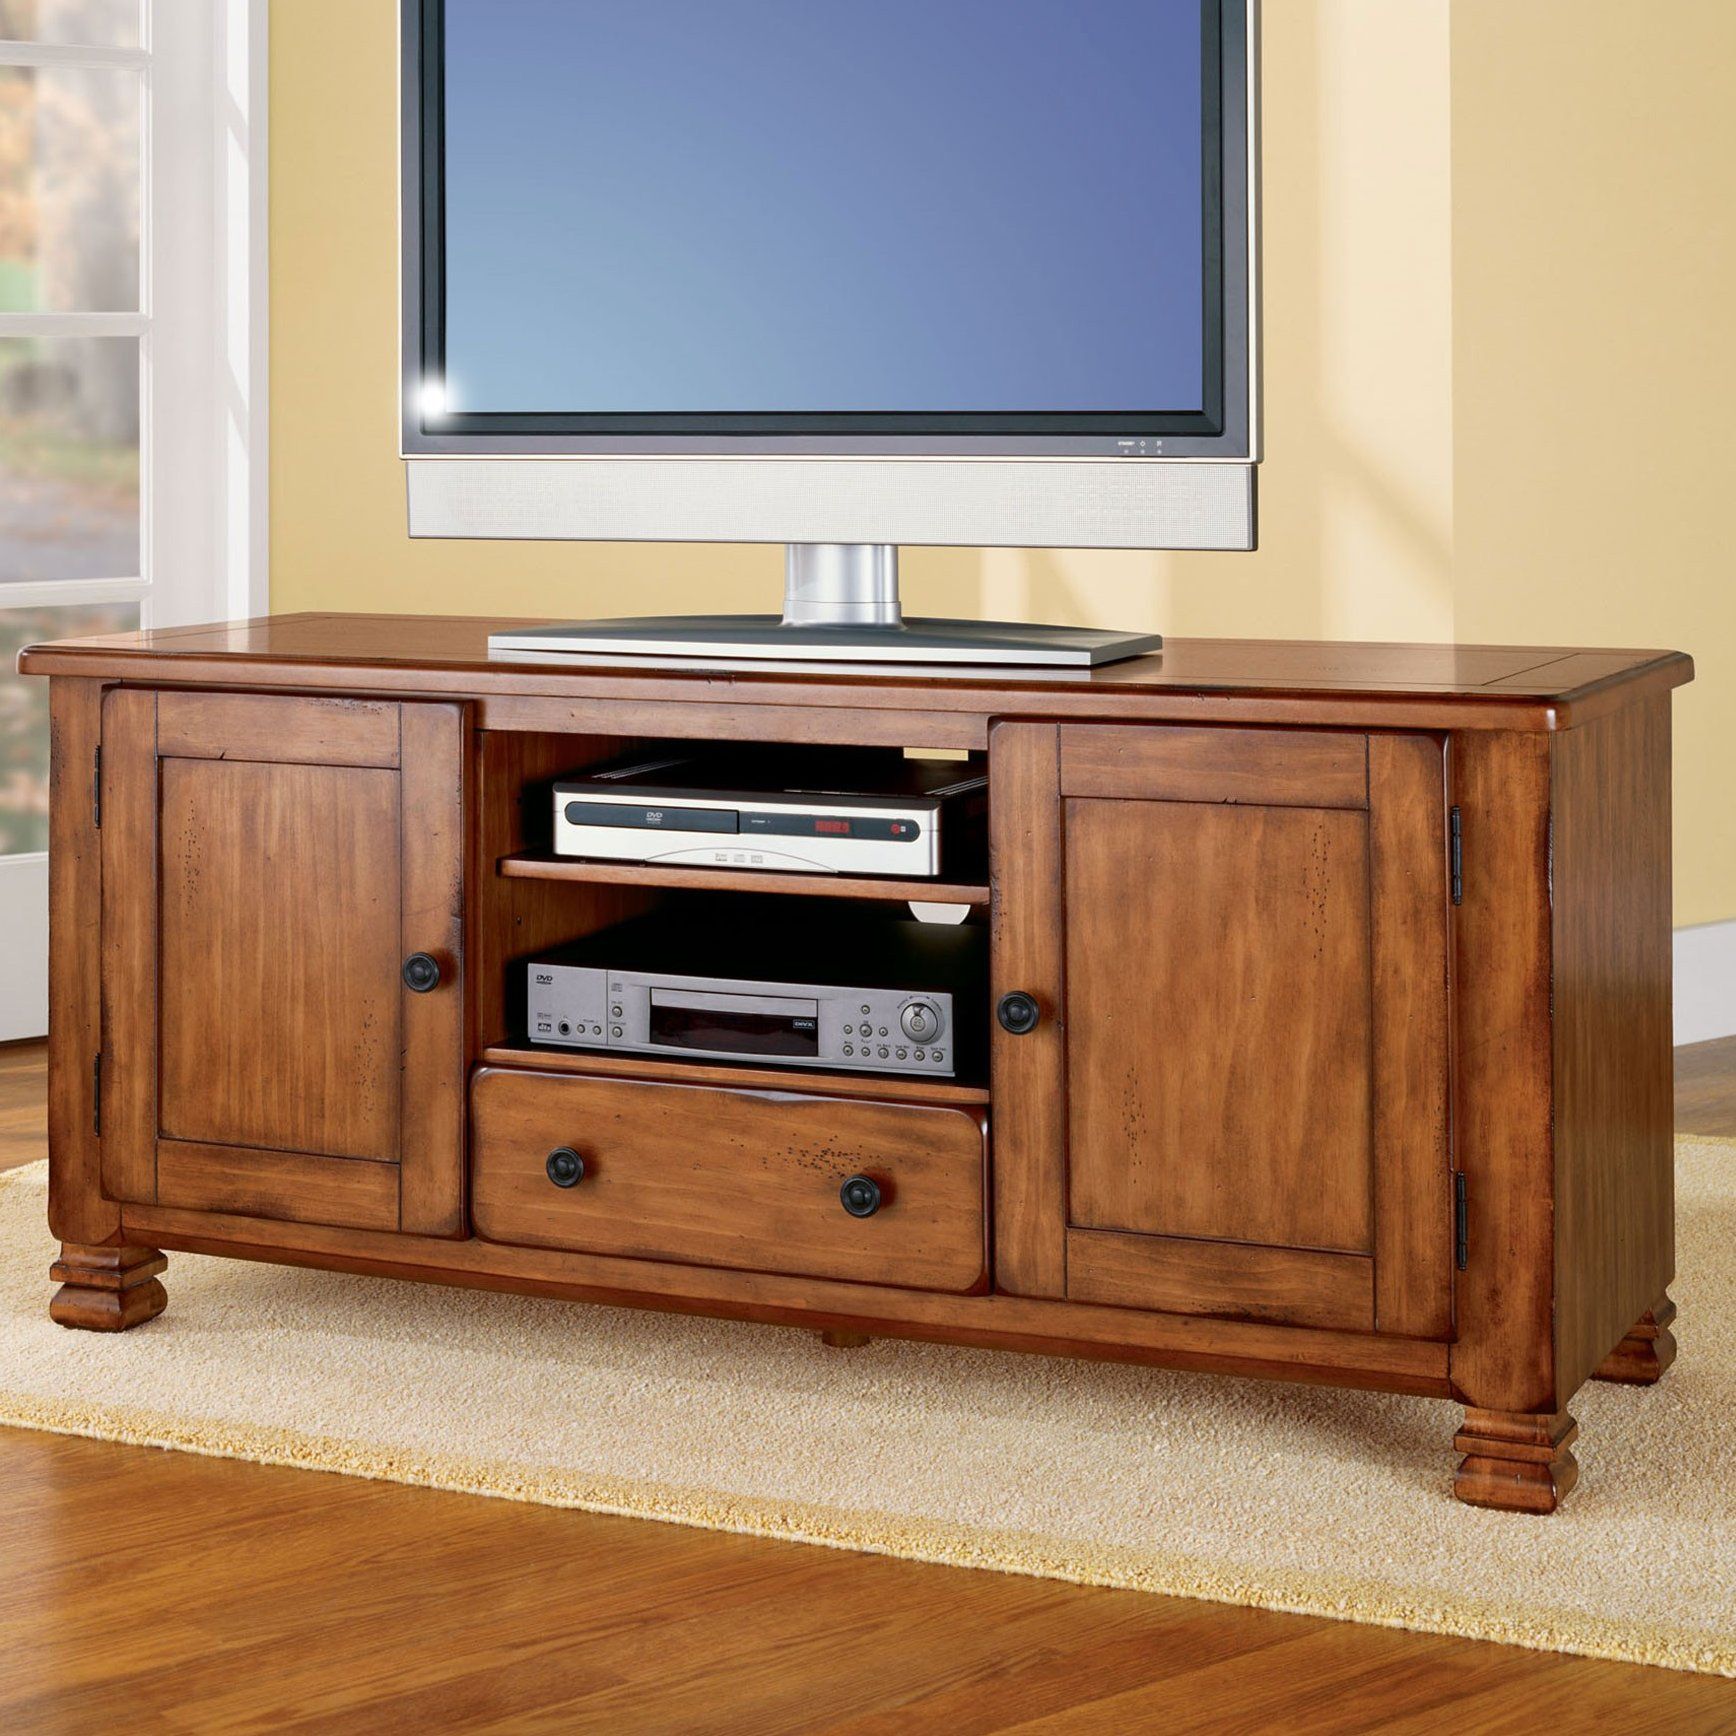 Alcott Hill Brackenridge Tv Stand For Tvs Up To 55" & Reviews | Wayfair Inside Laurent 60 Inch Tv Stands (Photo 28 of 30)